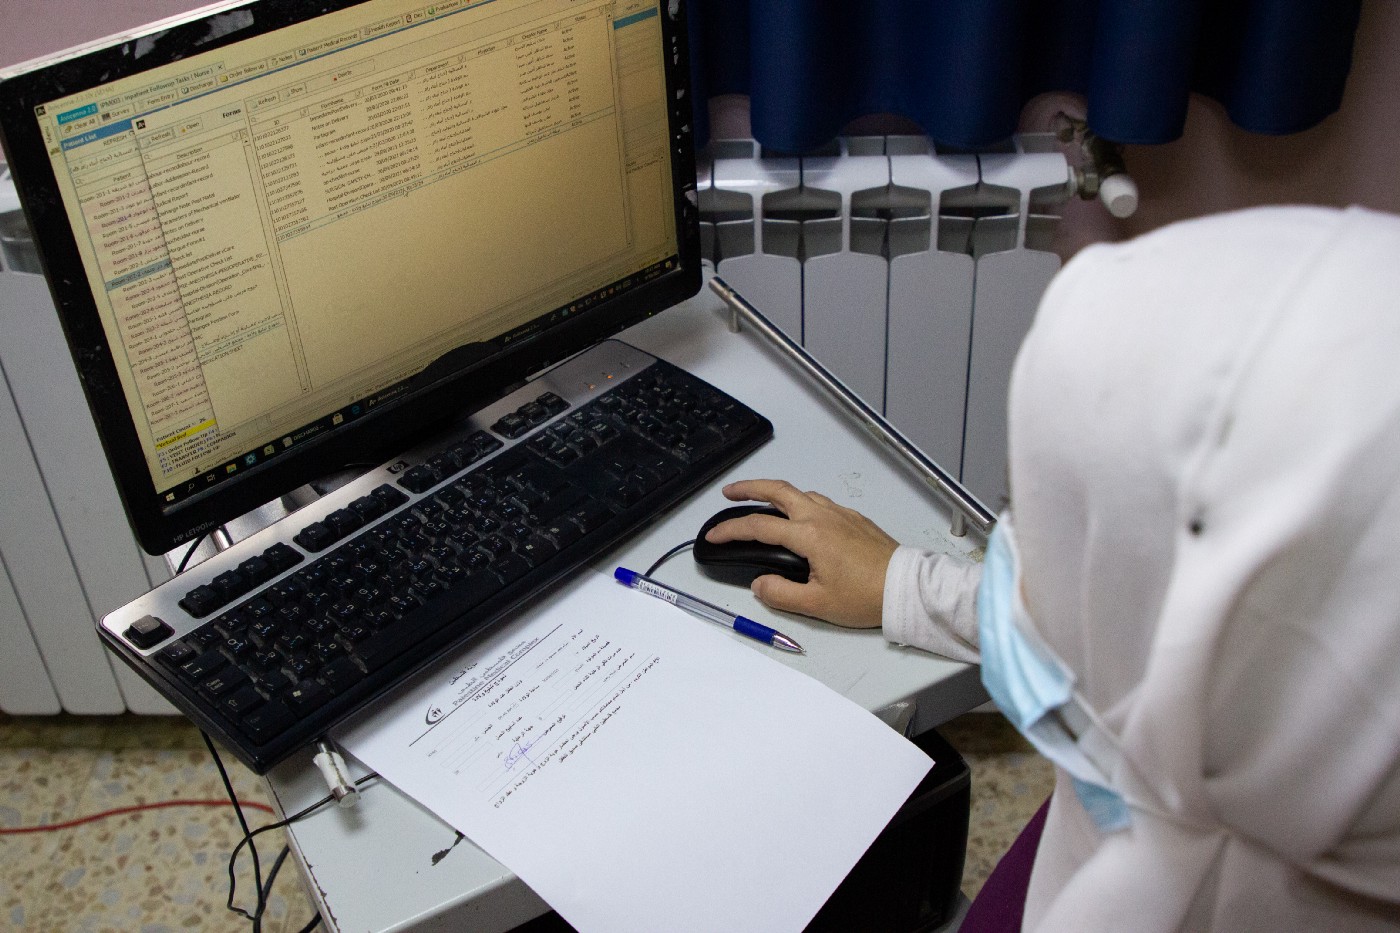 Following the success of birth and death records digitalization, Ministry and UNDP staff are exploring the potential for electronic records to simplify other kinds of government business.